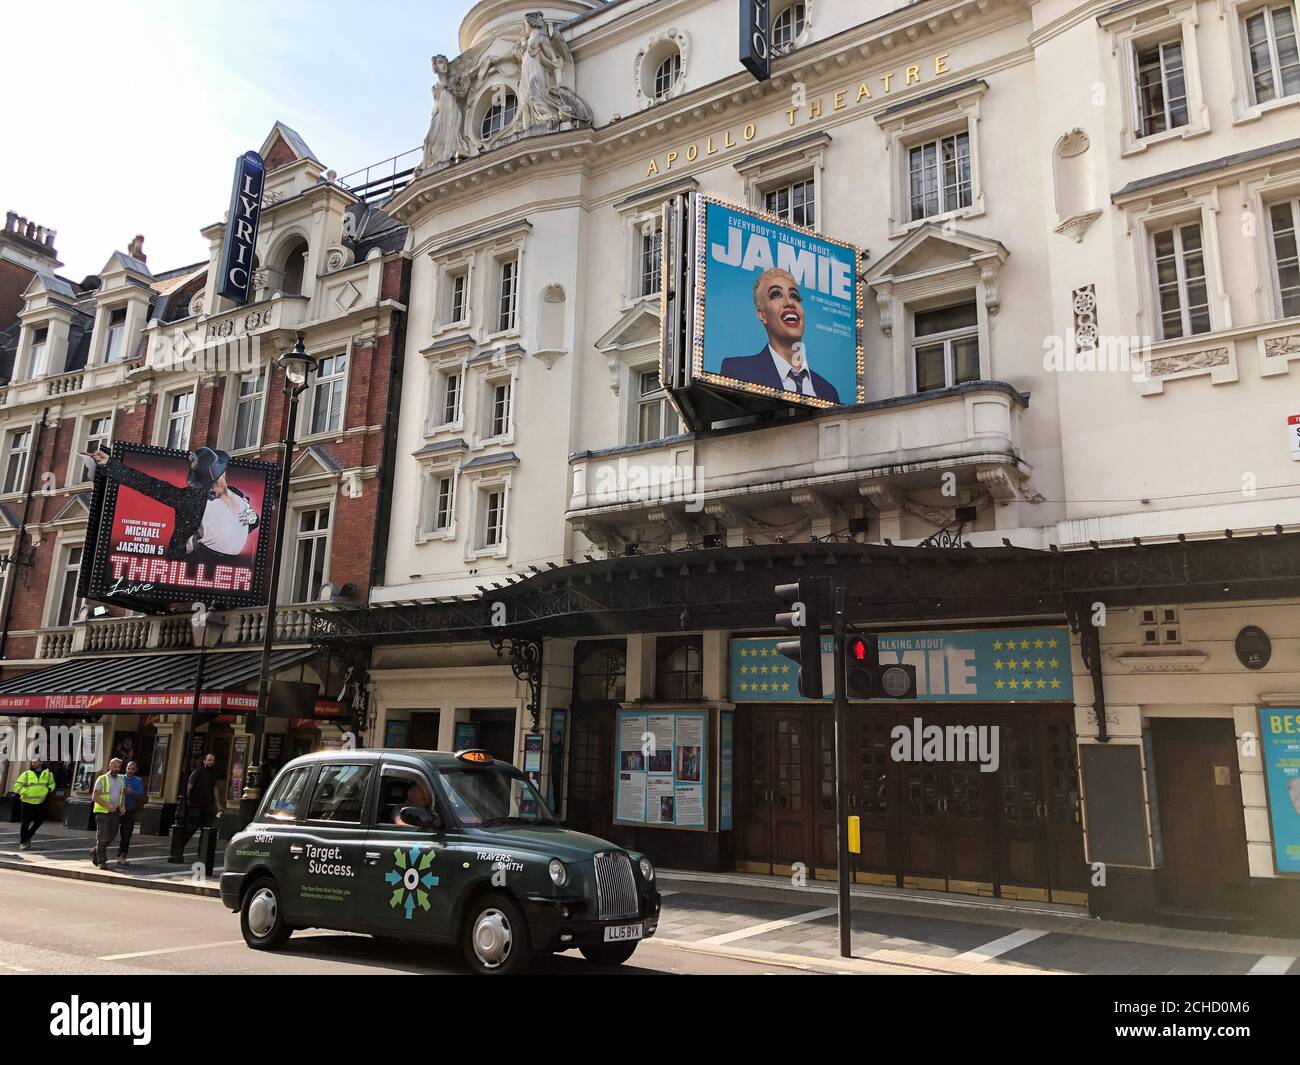 EVERYBODY IS TALKING ABOUT JAMIE at the Apollo Theatre in London's Shaftesbury Avenue is scheduled to recommence performances in the autumn of 2020. All UK theatres were obliged to close on government advice on 16th March 2020 in response to the Covid-19 pandemic. Stock Photo